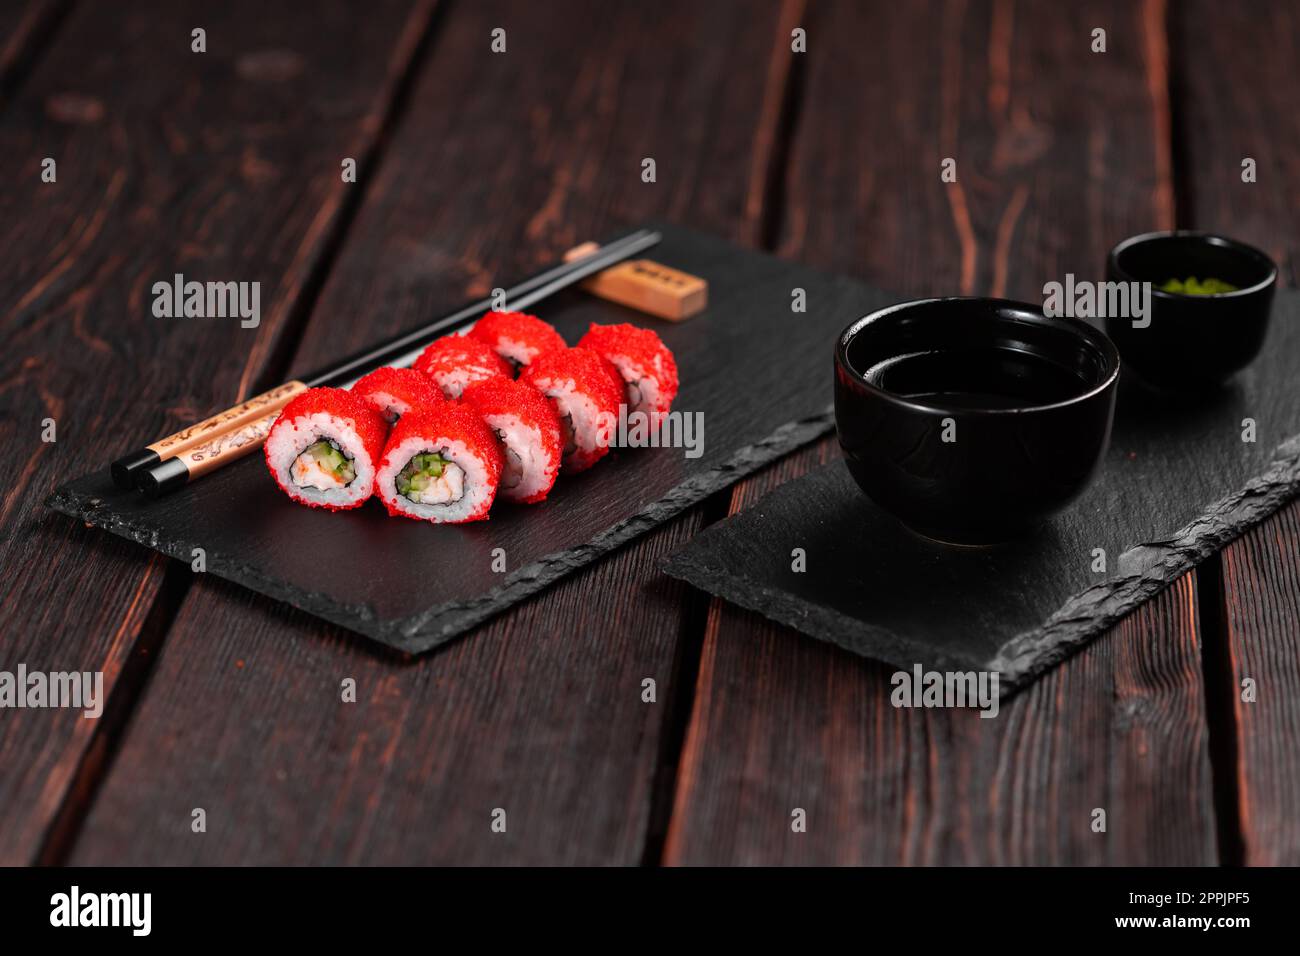 Sushi roll with shrimp and cucumber and tobiko caviar served on black board close-up - Japanese food Stock Photo